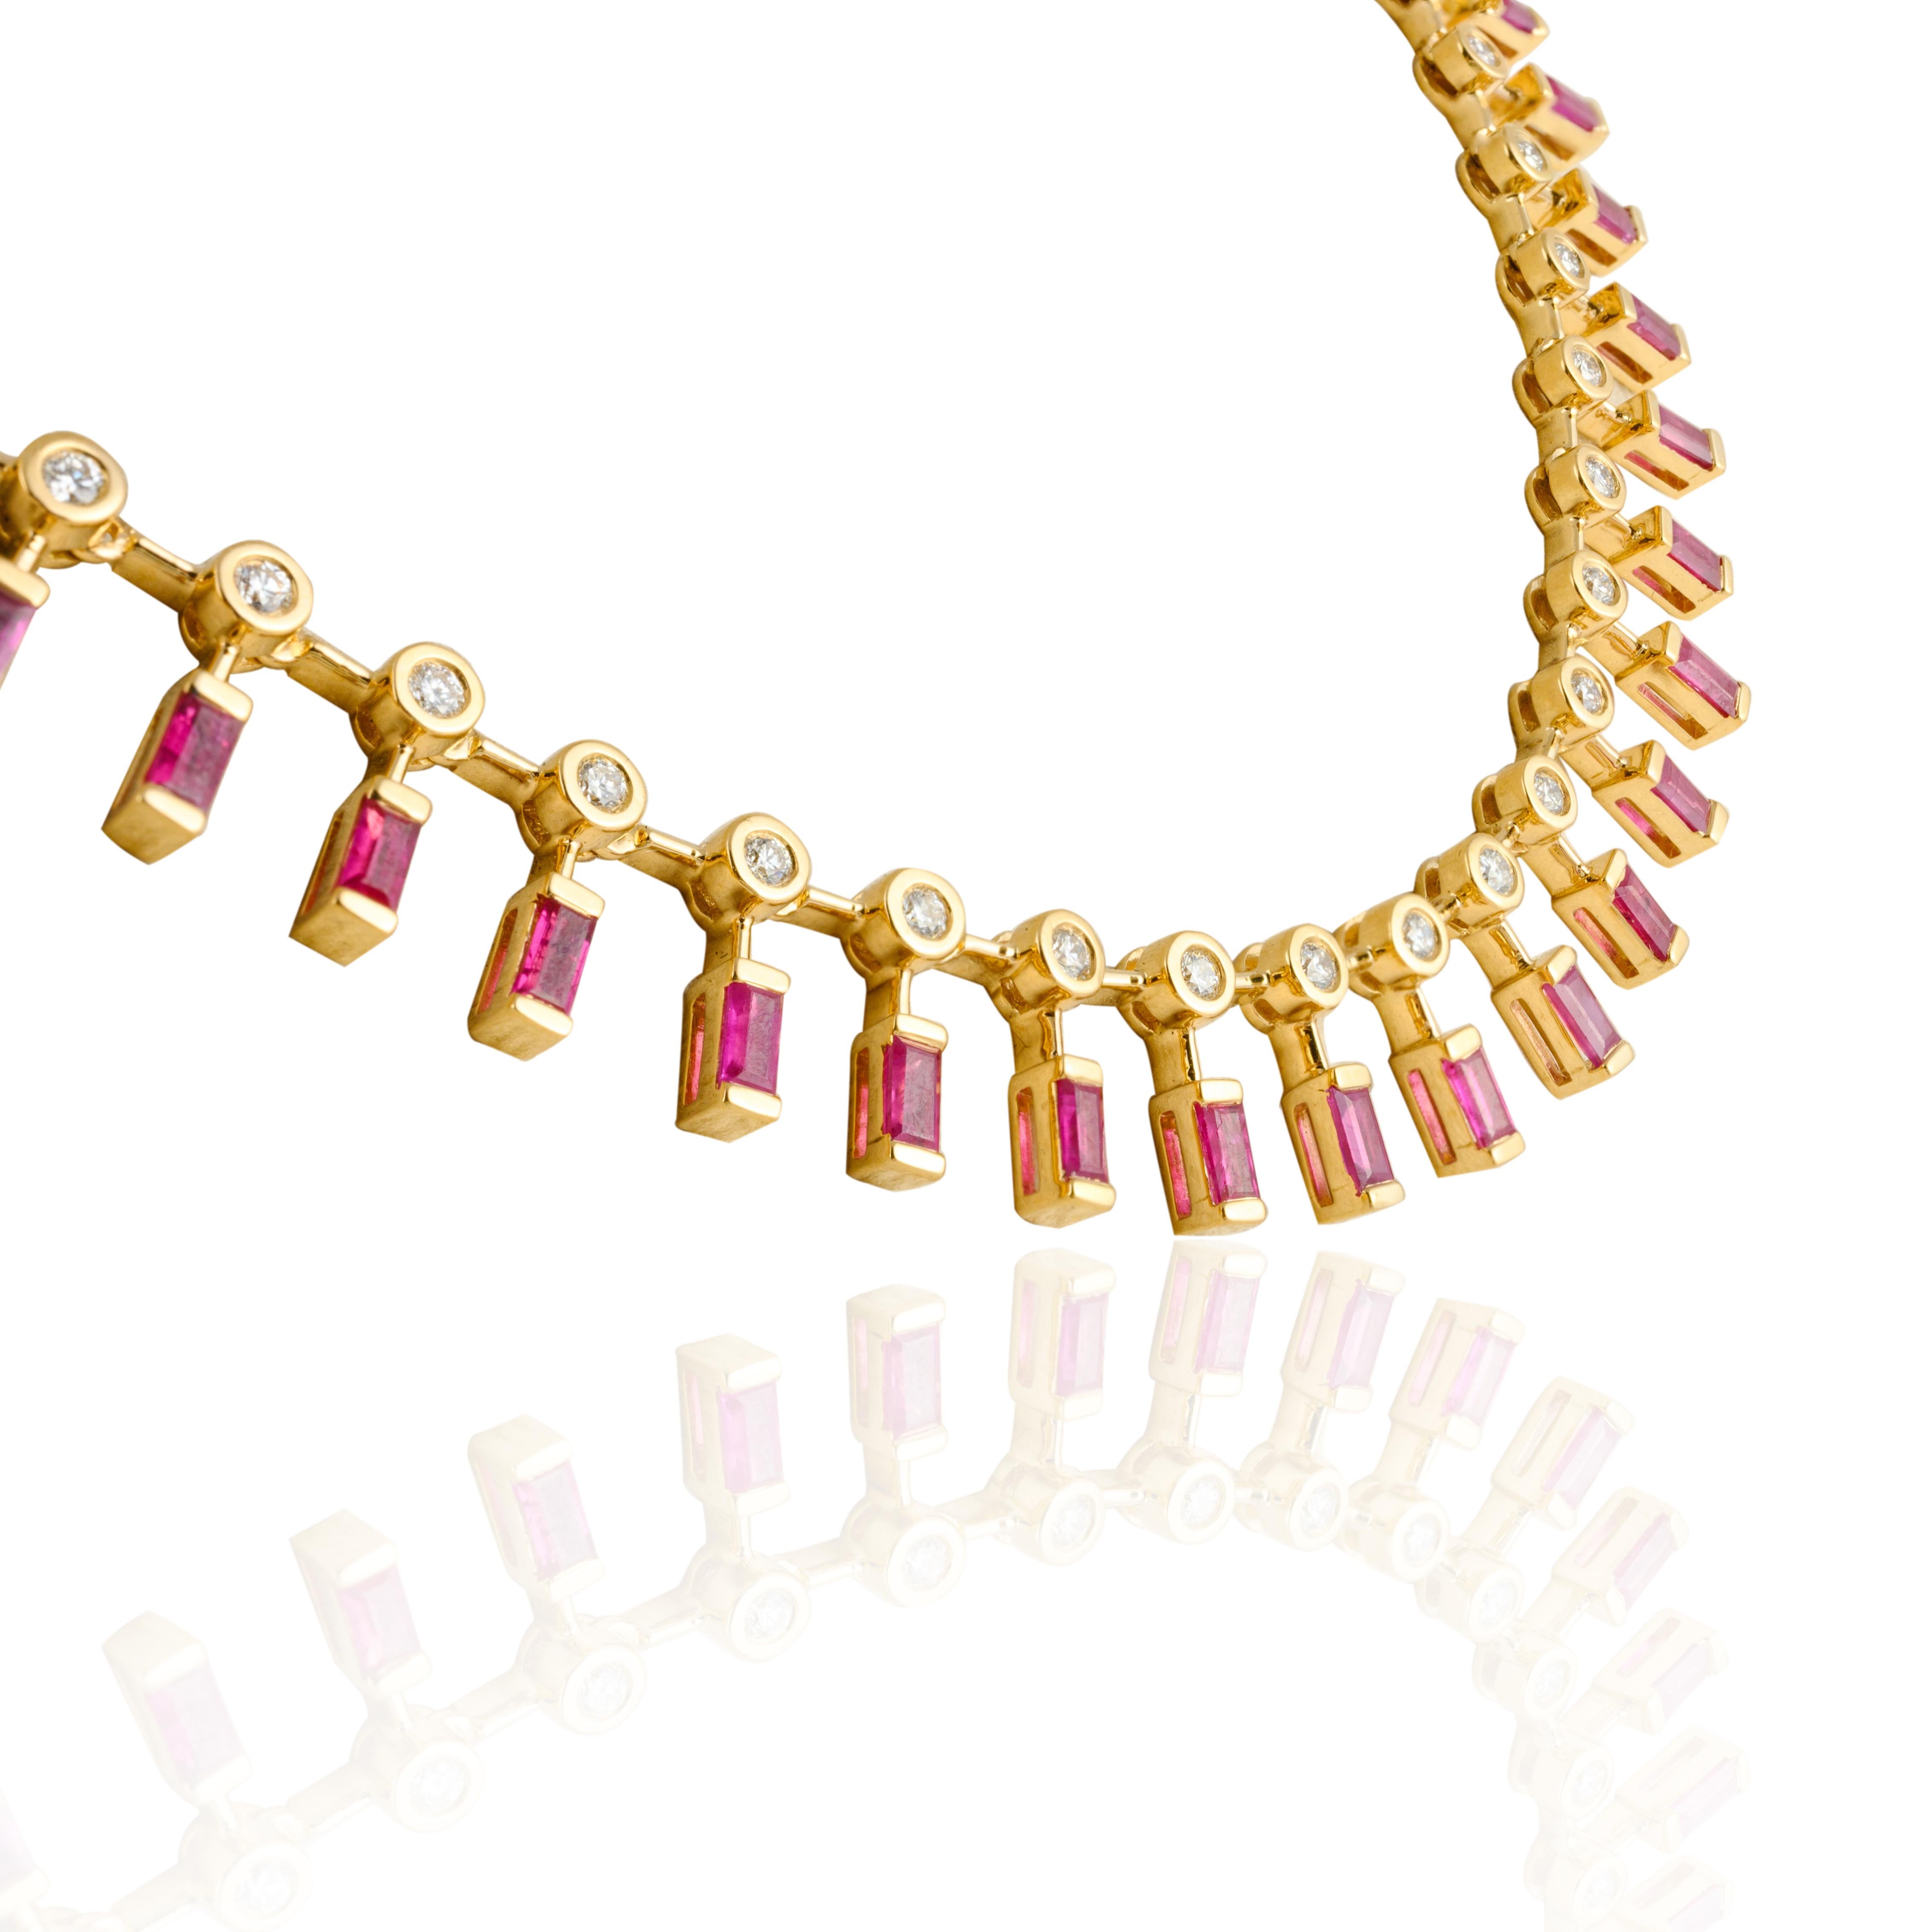 Ruby Diamond Chain Necklace in 18K Gold studded with baguette cut rubies. This stunning piece of jewelry instantly elevates a casual look or dressy outfit. 
Ruby improves mental strength. 
Designed with baguette cut ruby dangling under the diamonds